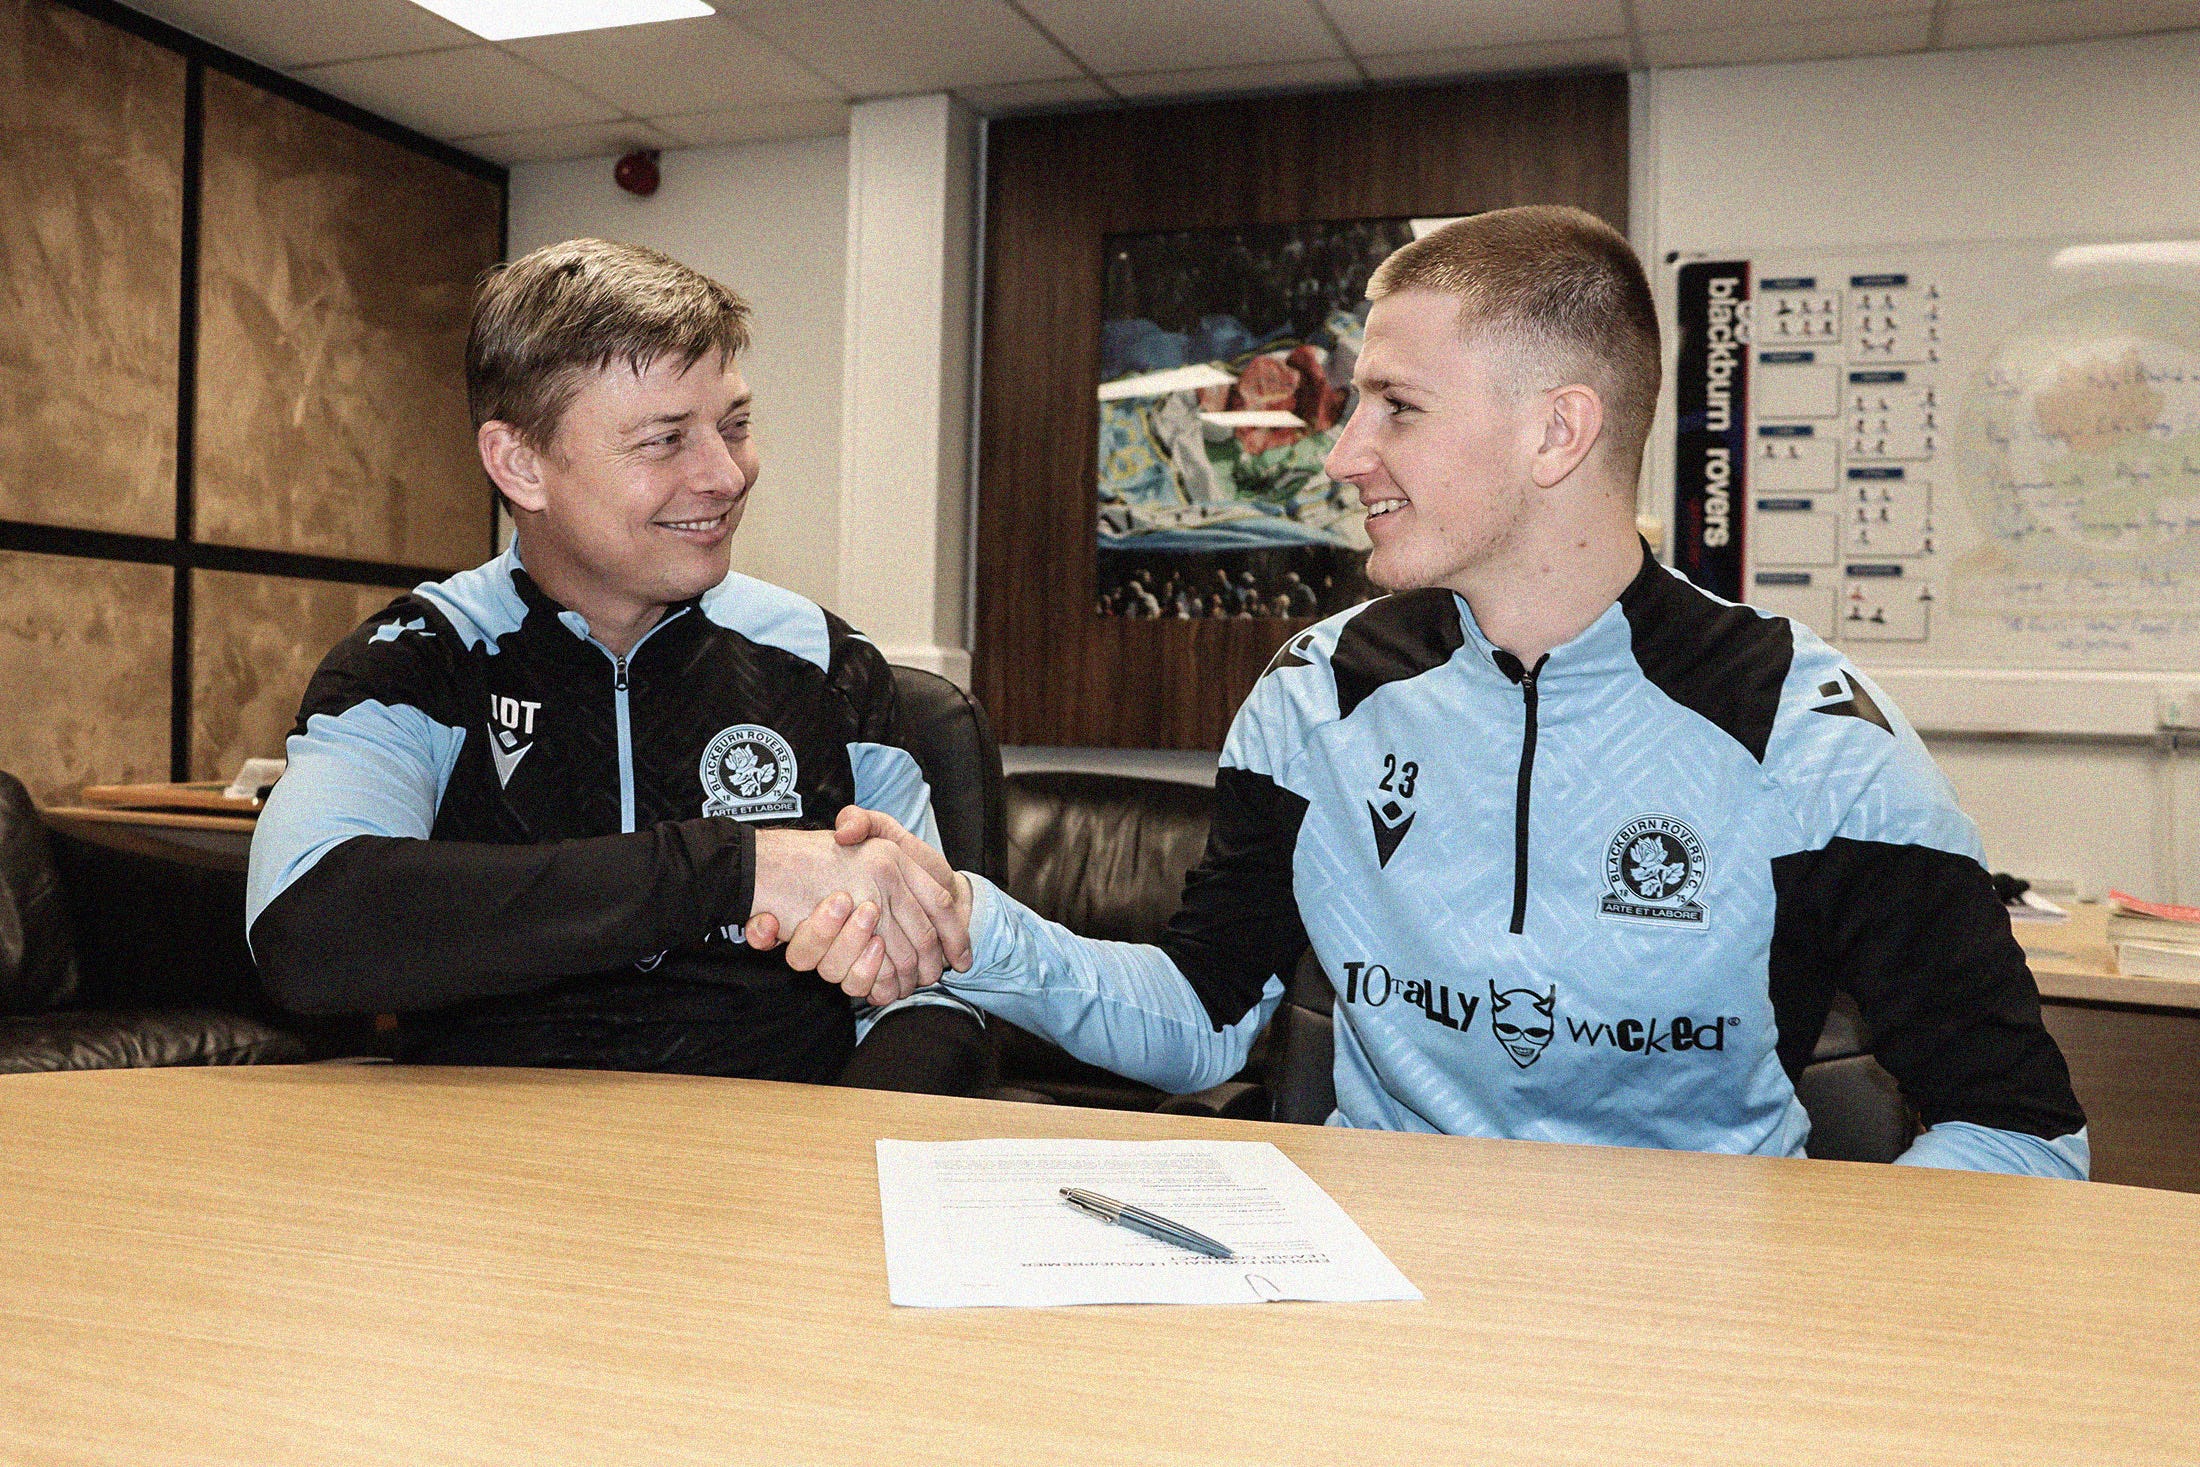 A photo of Jon Dahl Tomasson and Adam Wharton, shaking hands, looking and smiling at each other while sat at a table, with a signed contract in the foreground and an office scene in the background.